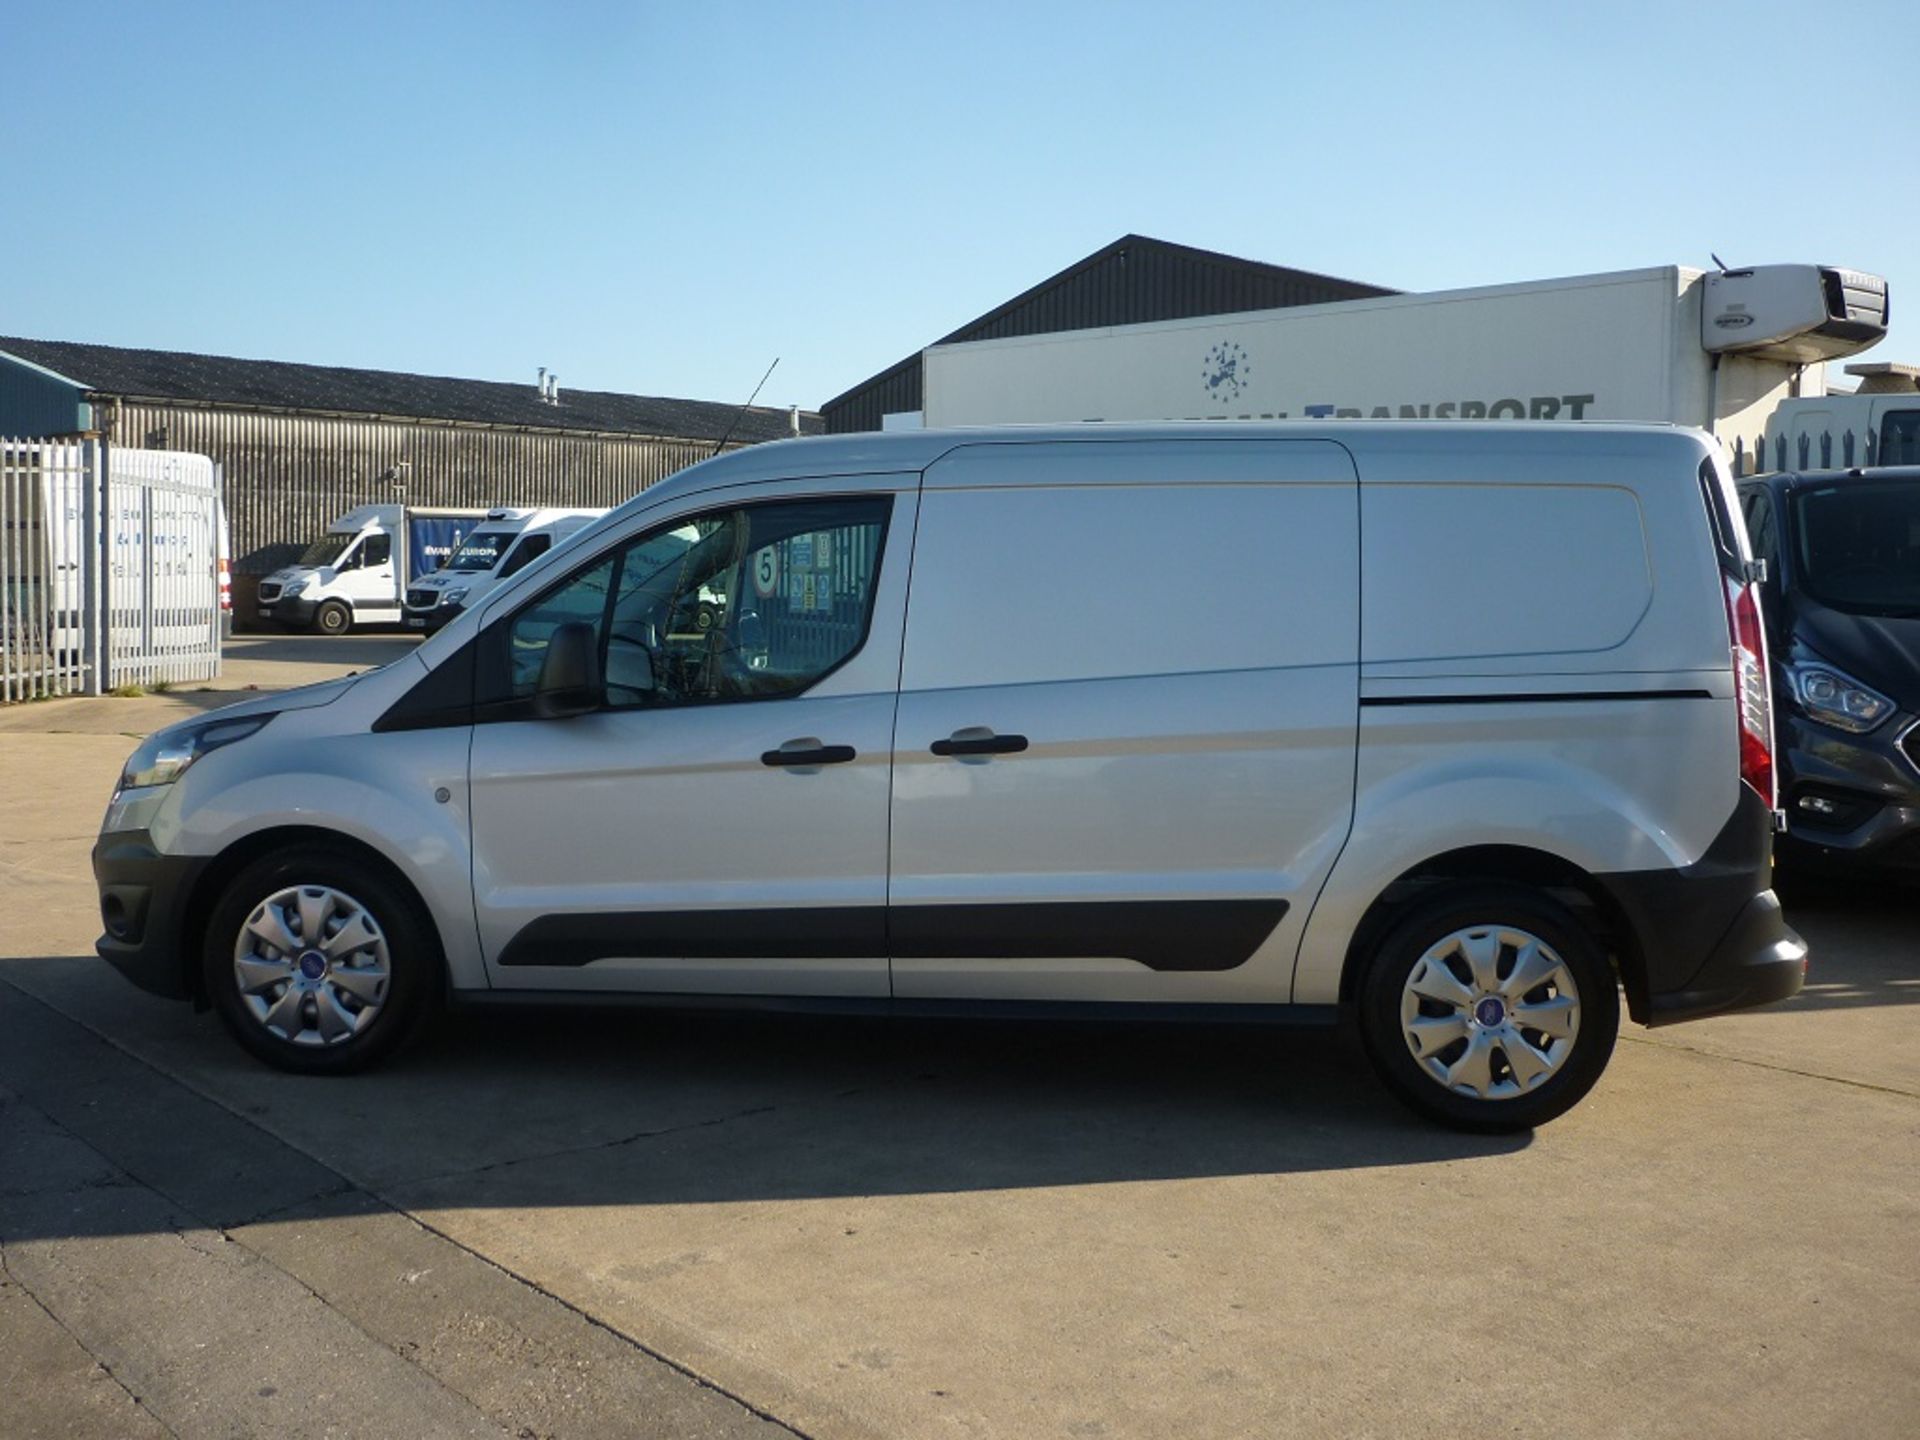 2015/15 REG FORD TRANSIT CONNECT 210 ECO-TECH SILVER DIESEL PANEL VAN, SHOWING 0 FORMER KEEPERS - Image 3 of 7